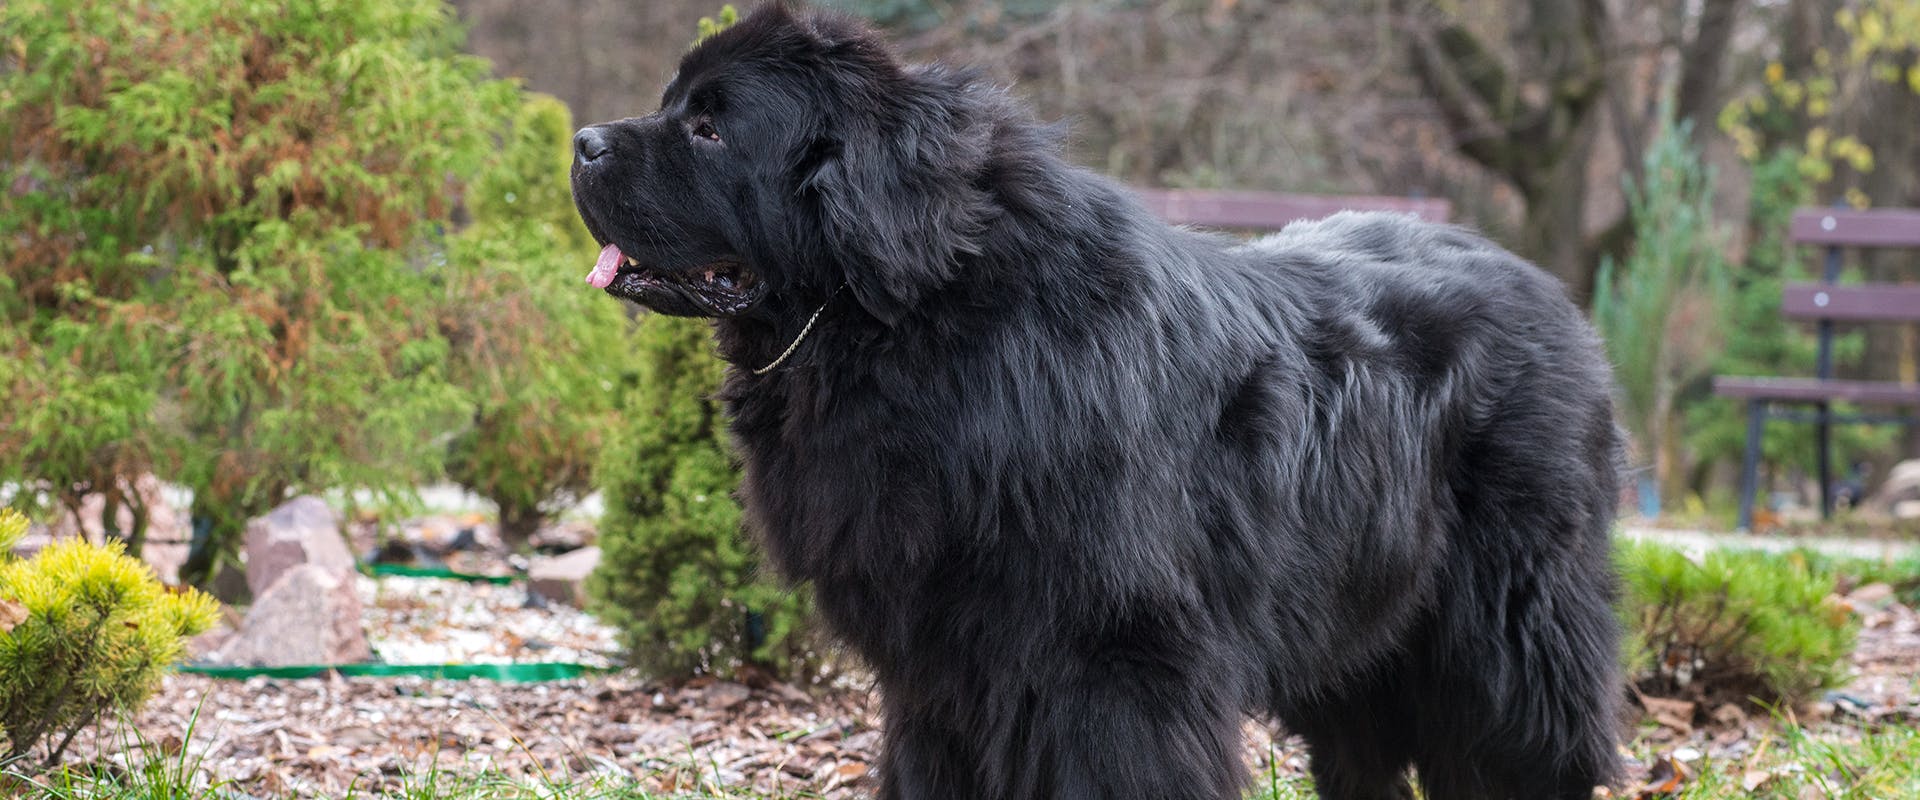 A fluffy Newfoundland dog standing outdoors, surrounded by trees and nature